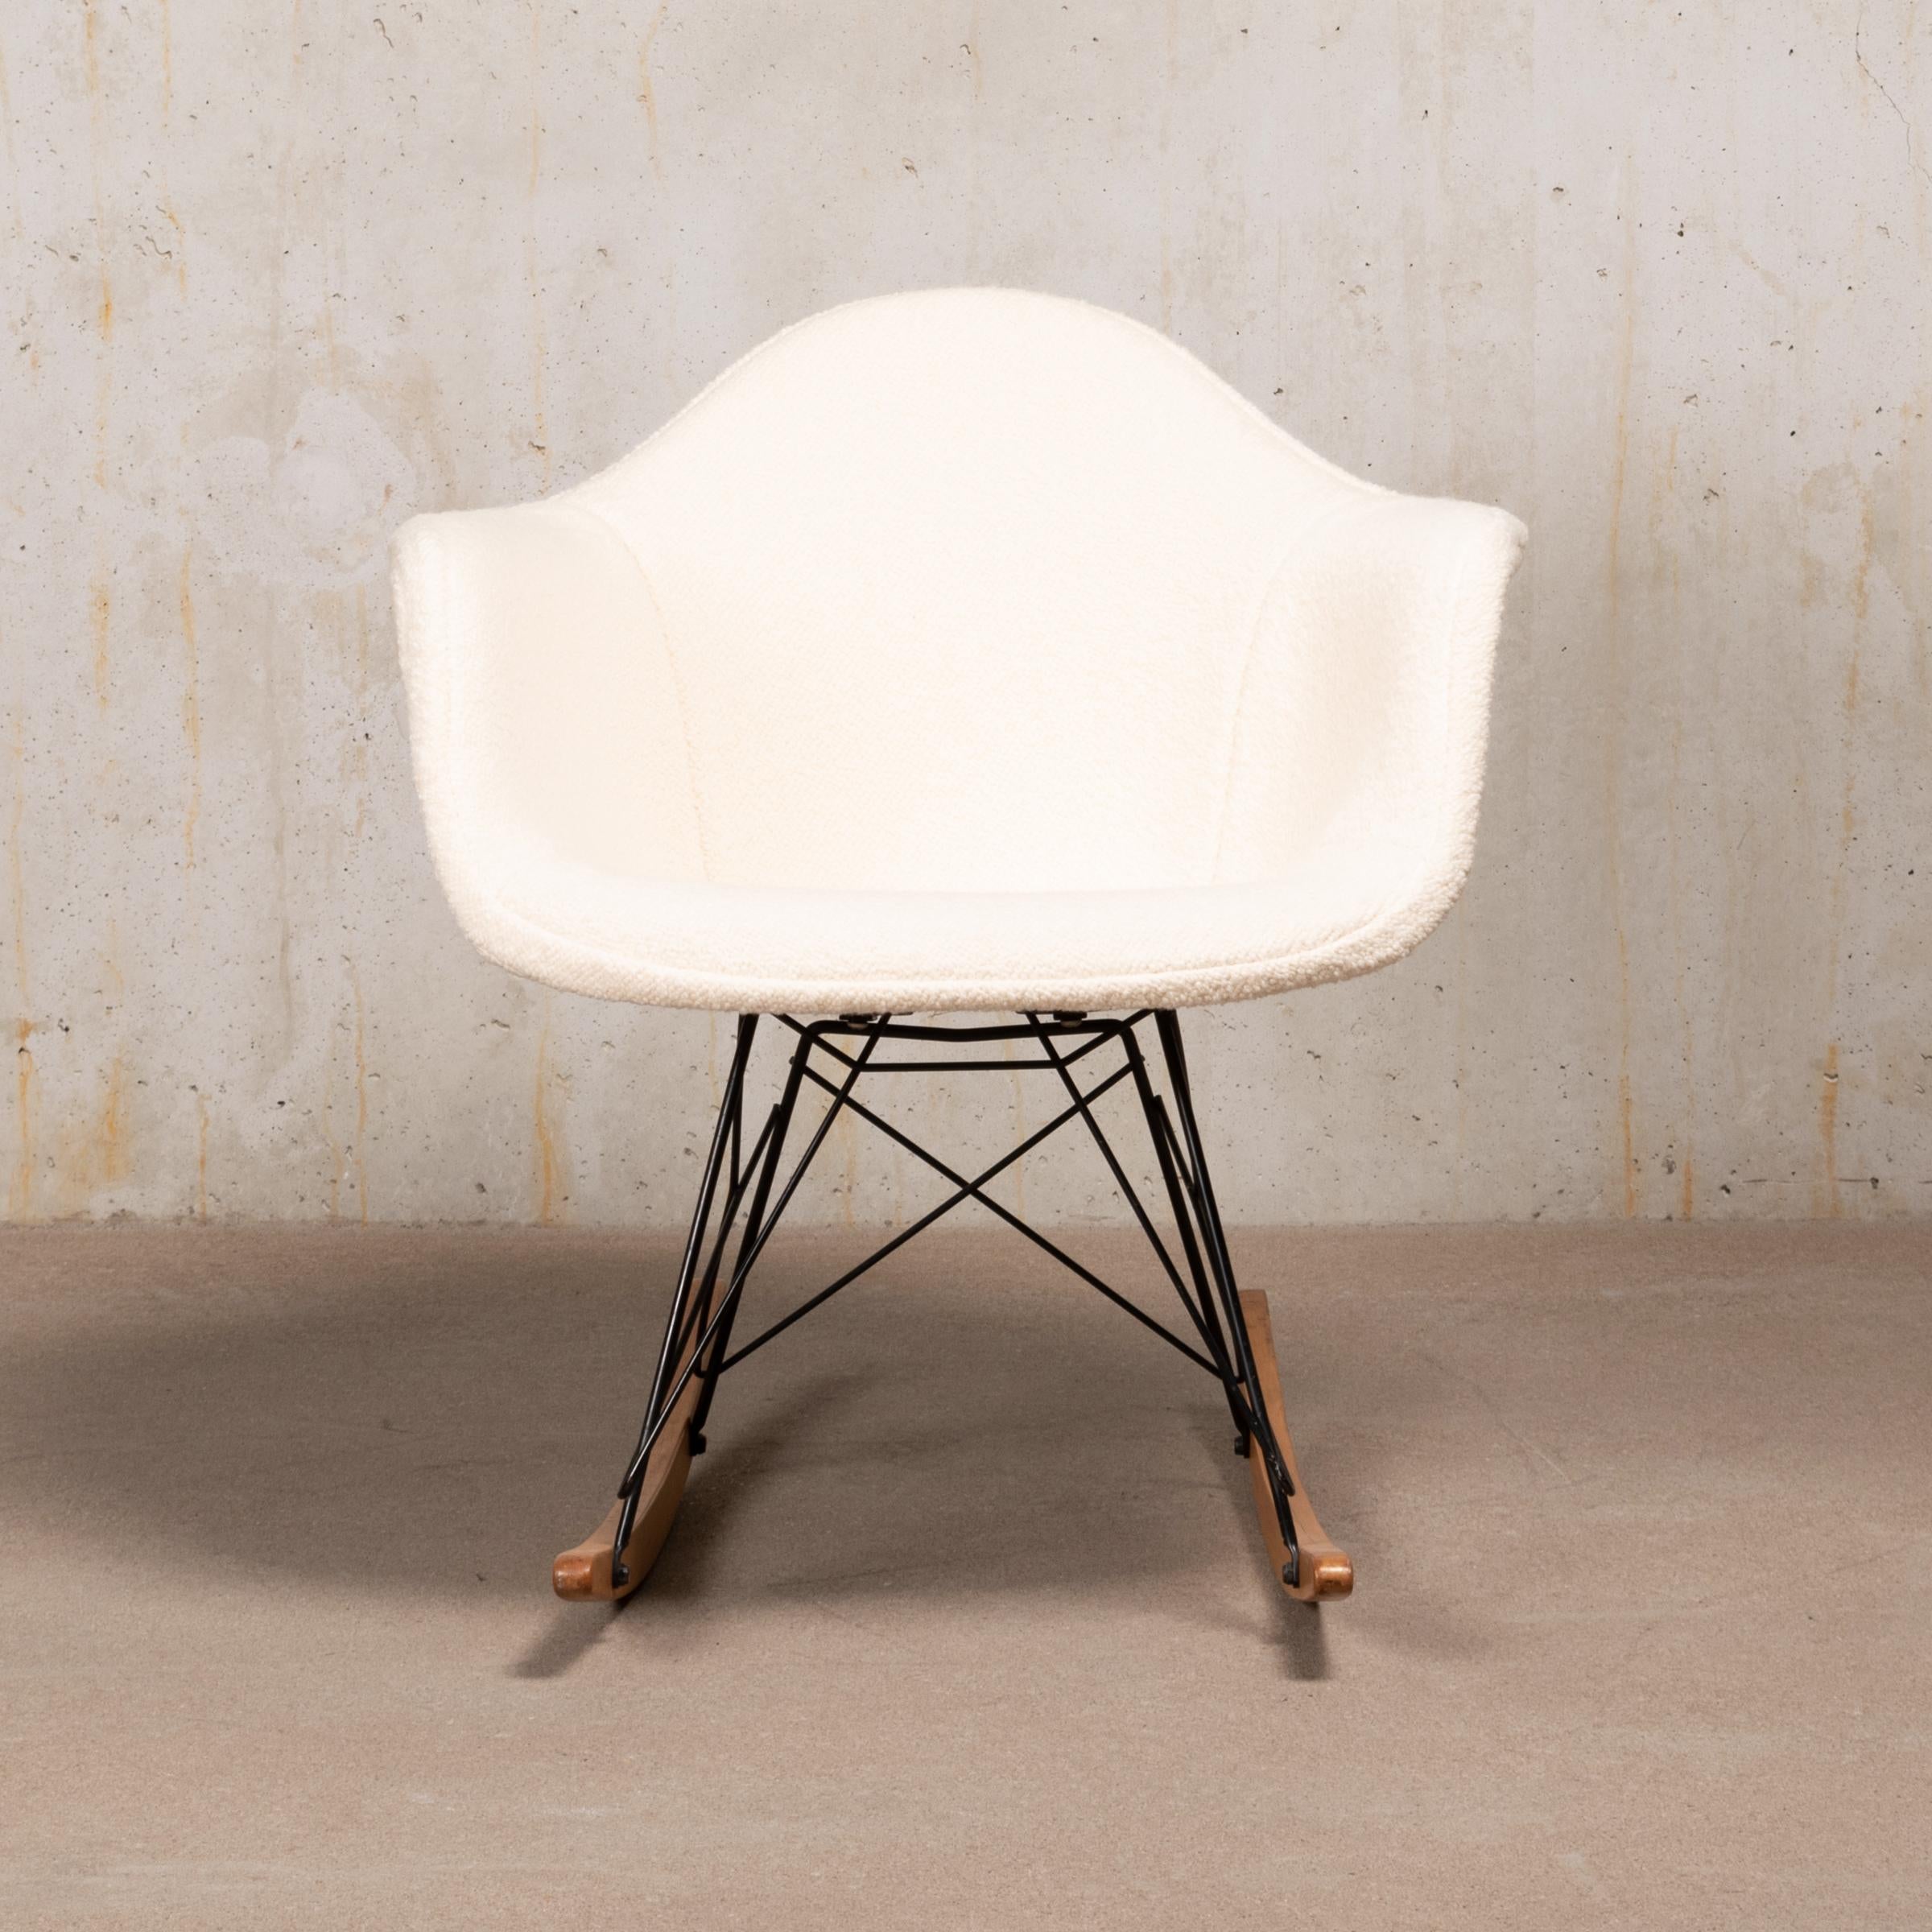 Beautiful and iconic mid-1950s RAR rocking armchair in very good condition by Charles and Ray Eames. Newly upholstered in premium Dedar Bouclé white wool and with original base and runners! Signed with embossed factory logo (Zenith plastics).